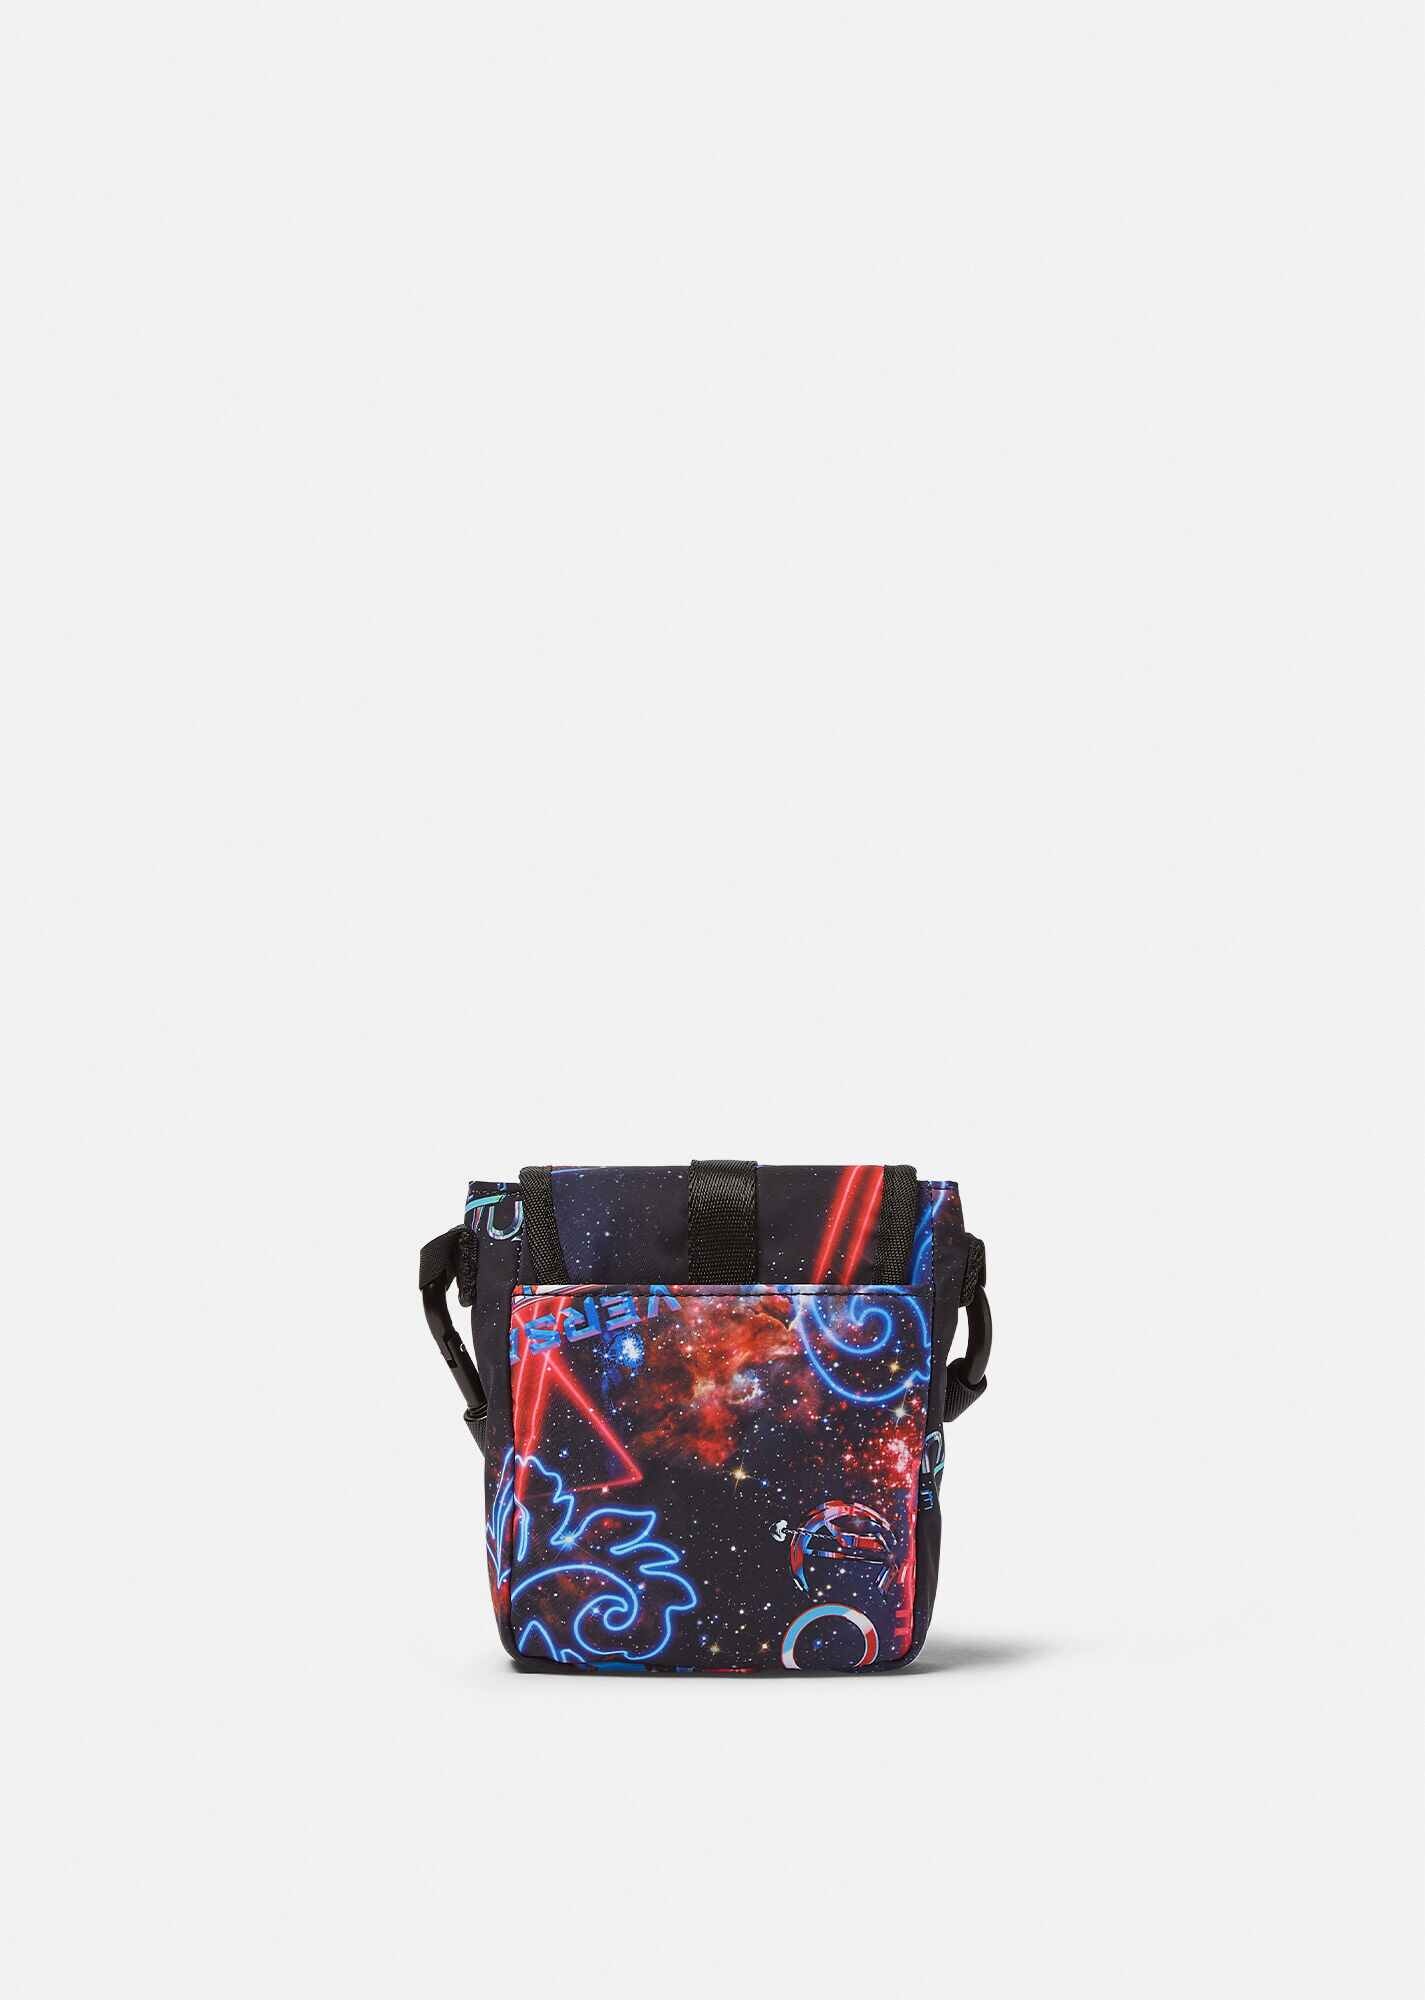 Galaxy Couture Messenger Bag - 3